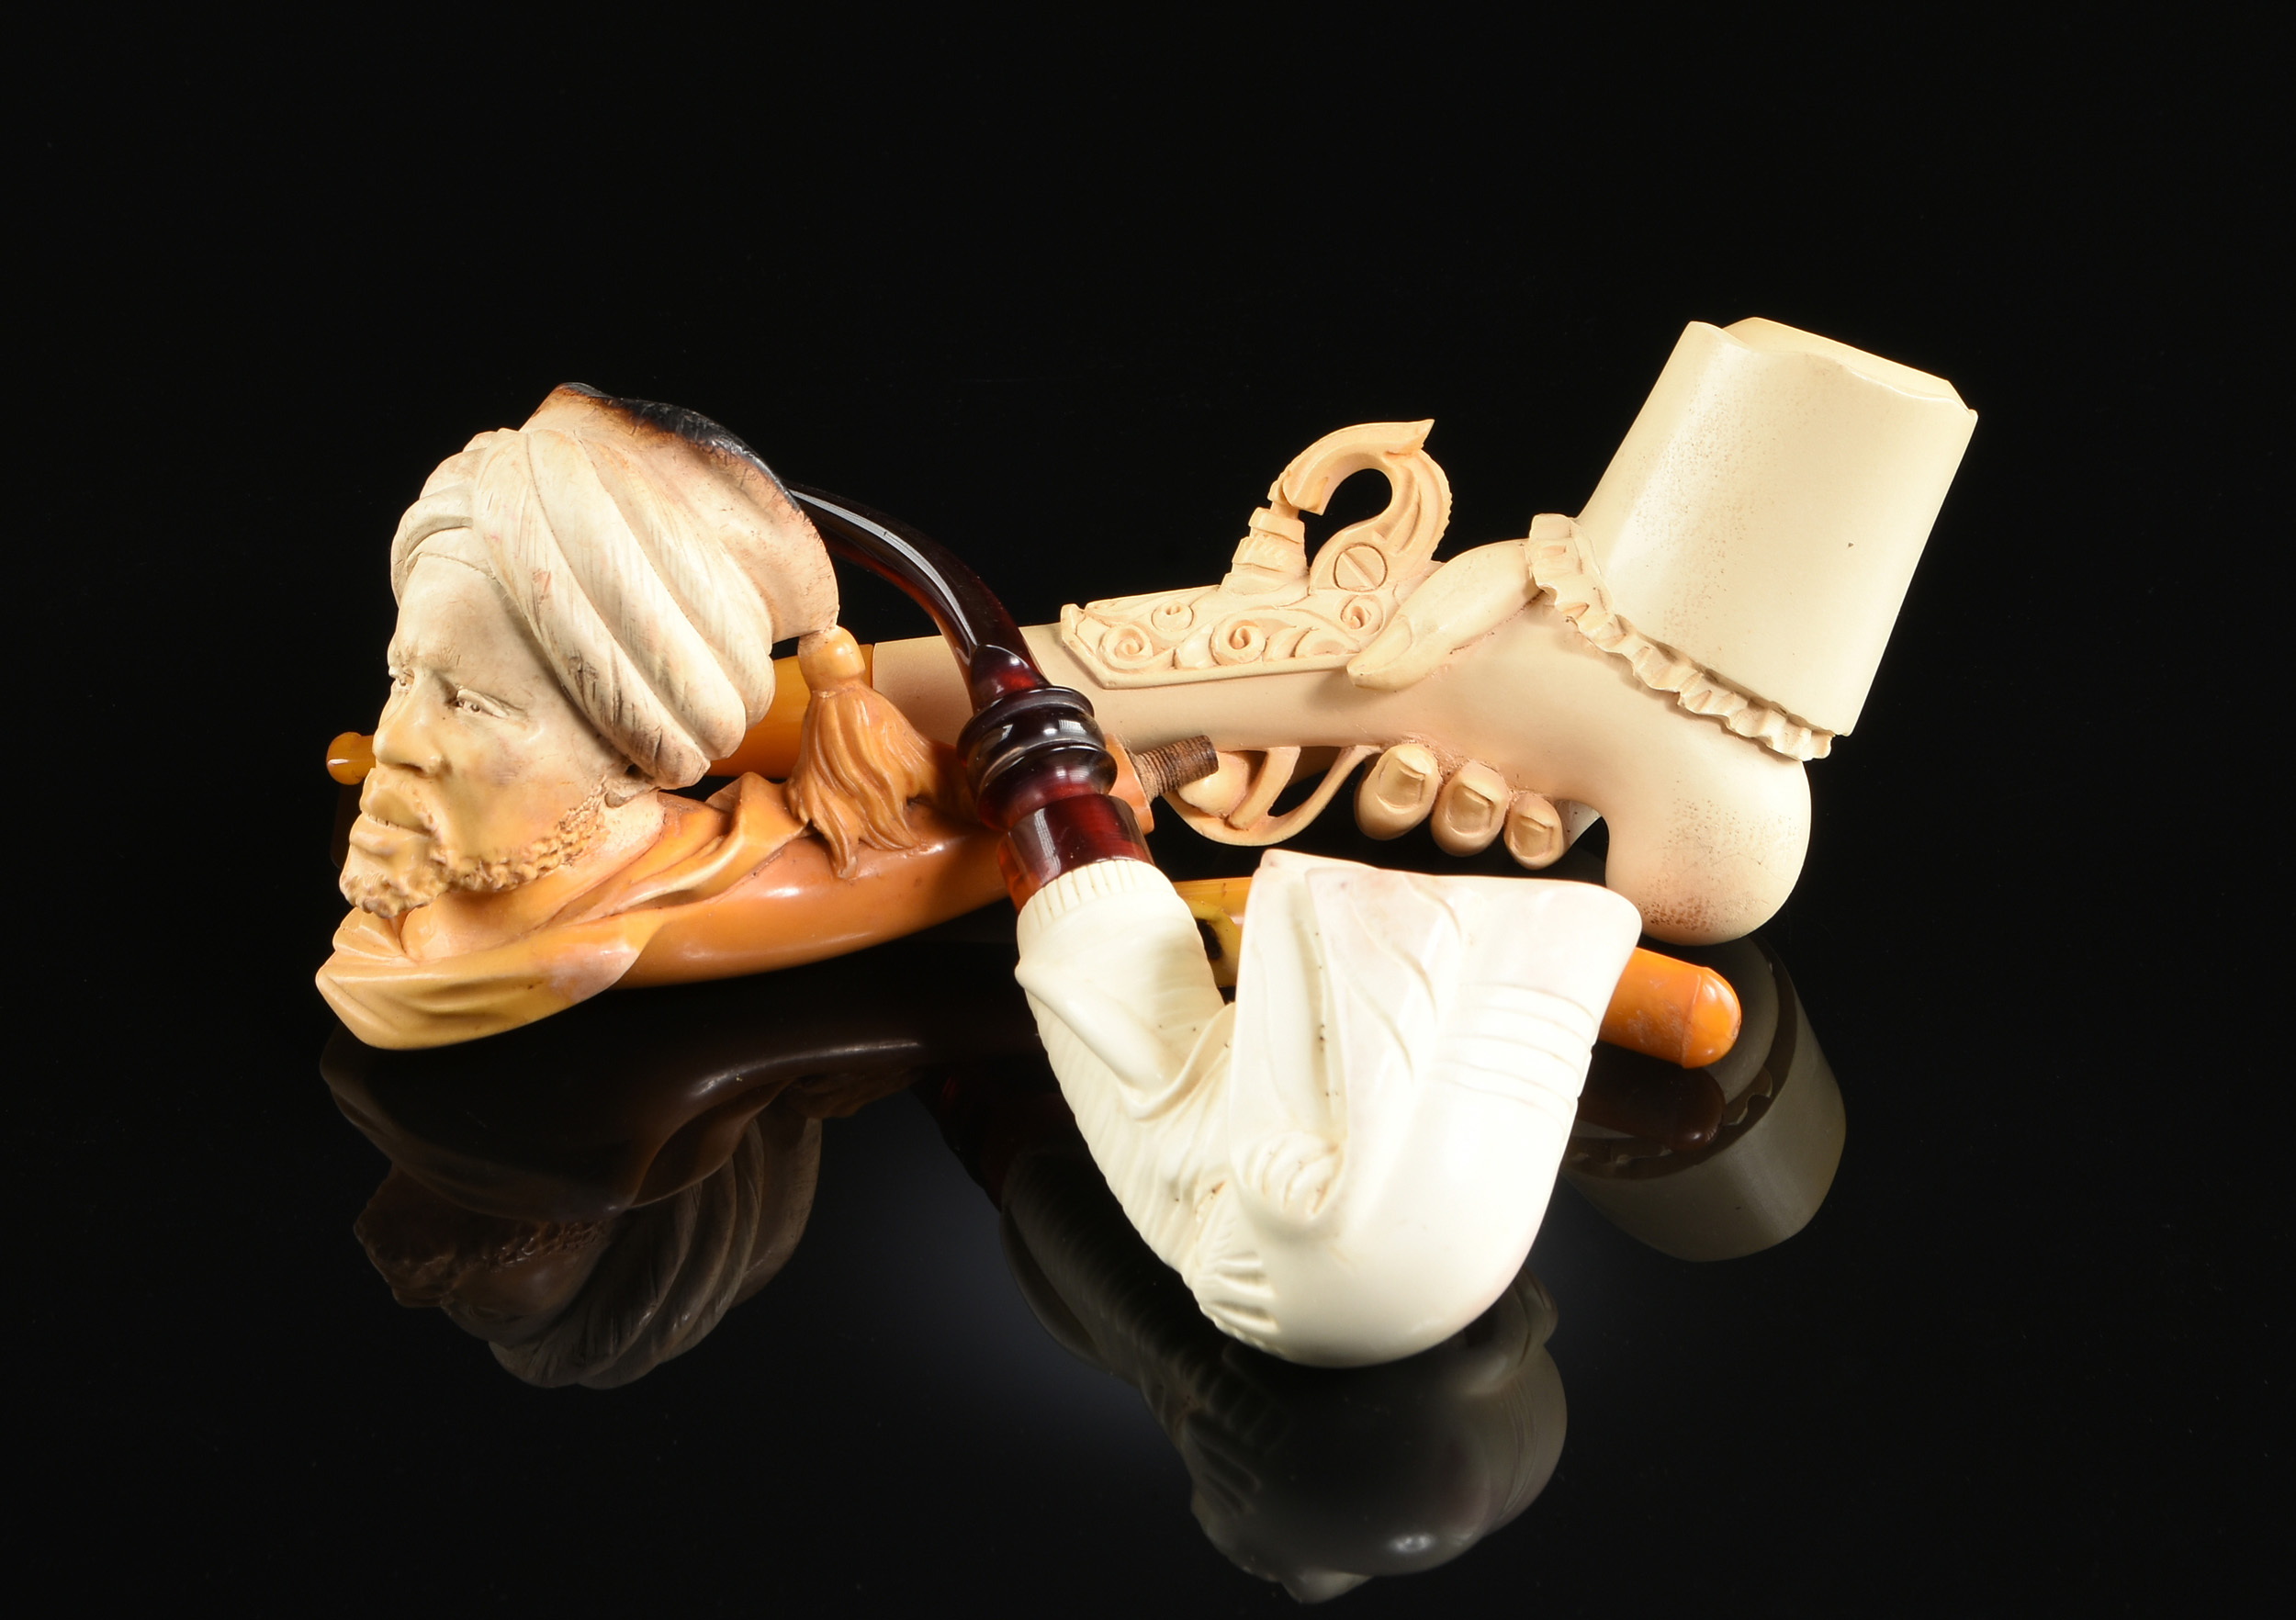 A GROUP OF THREE MEERSCHAUM TOBACCO PIPES, LATE 19TH/EARLY 20TH CENTURY, carved in the form of a - Image 2 of 9